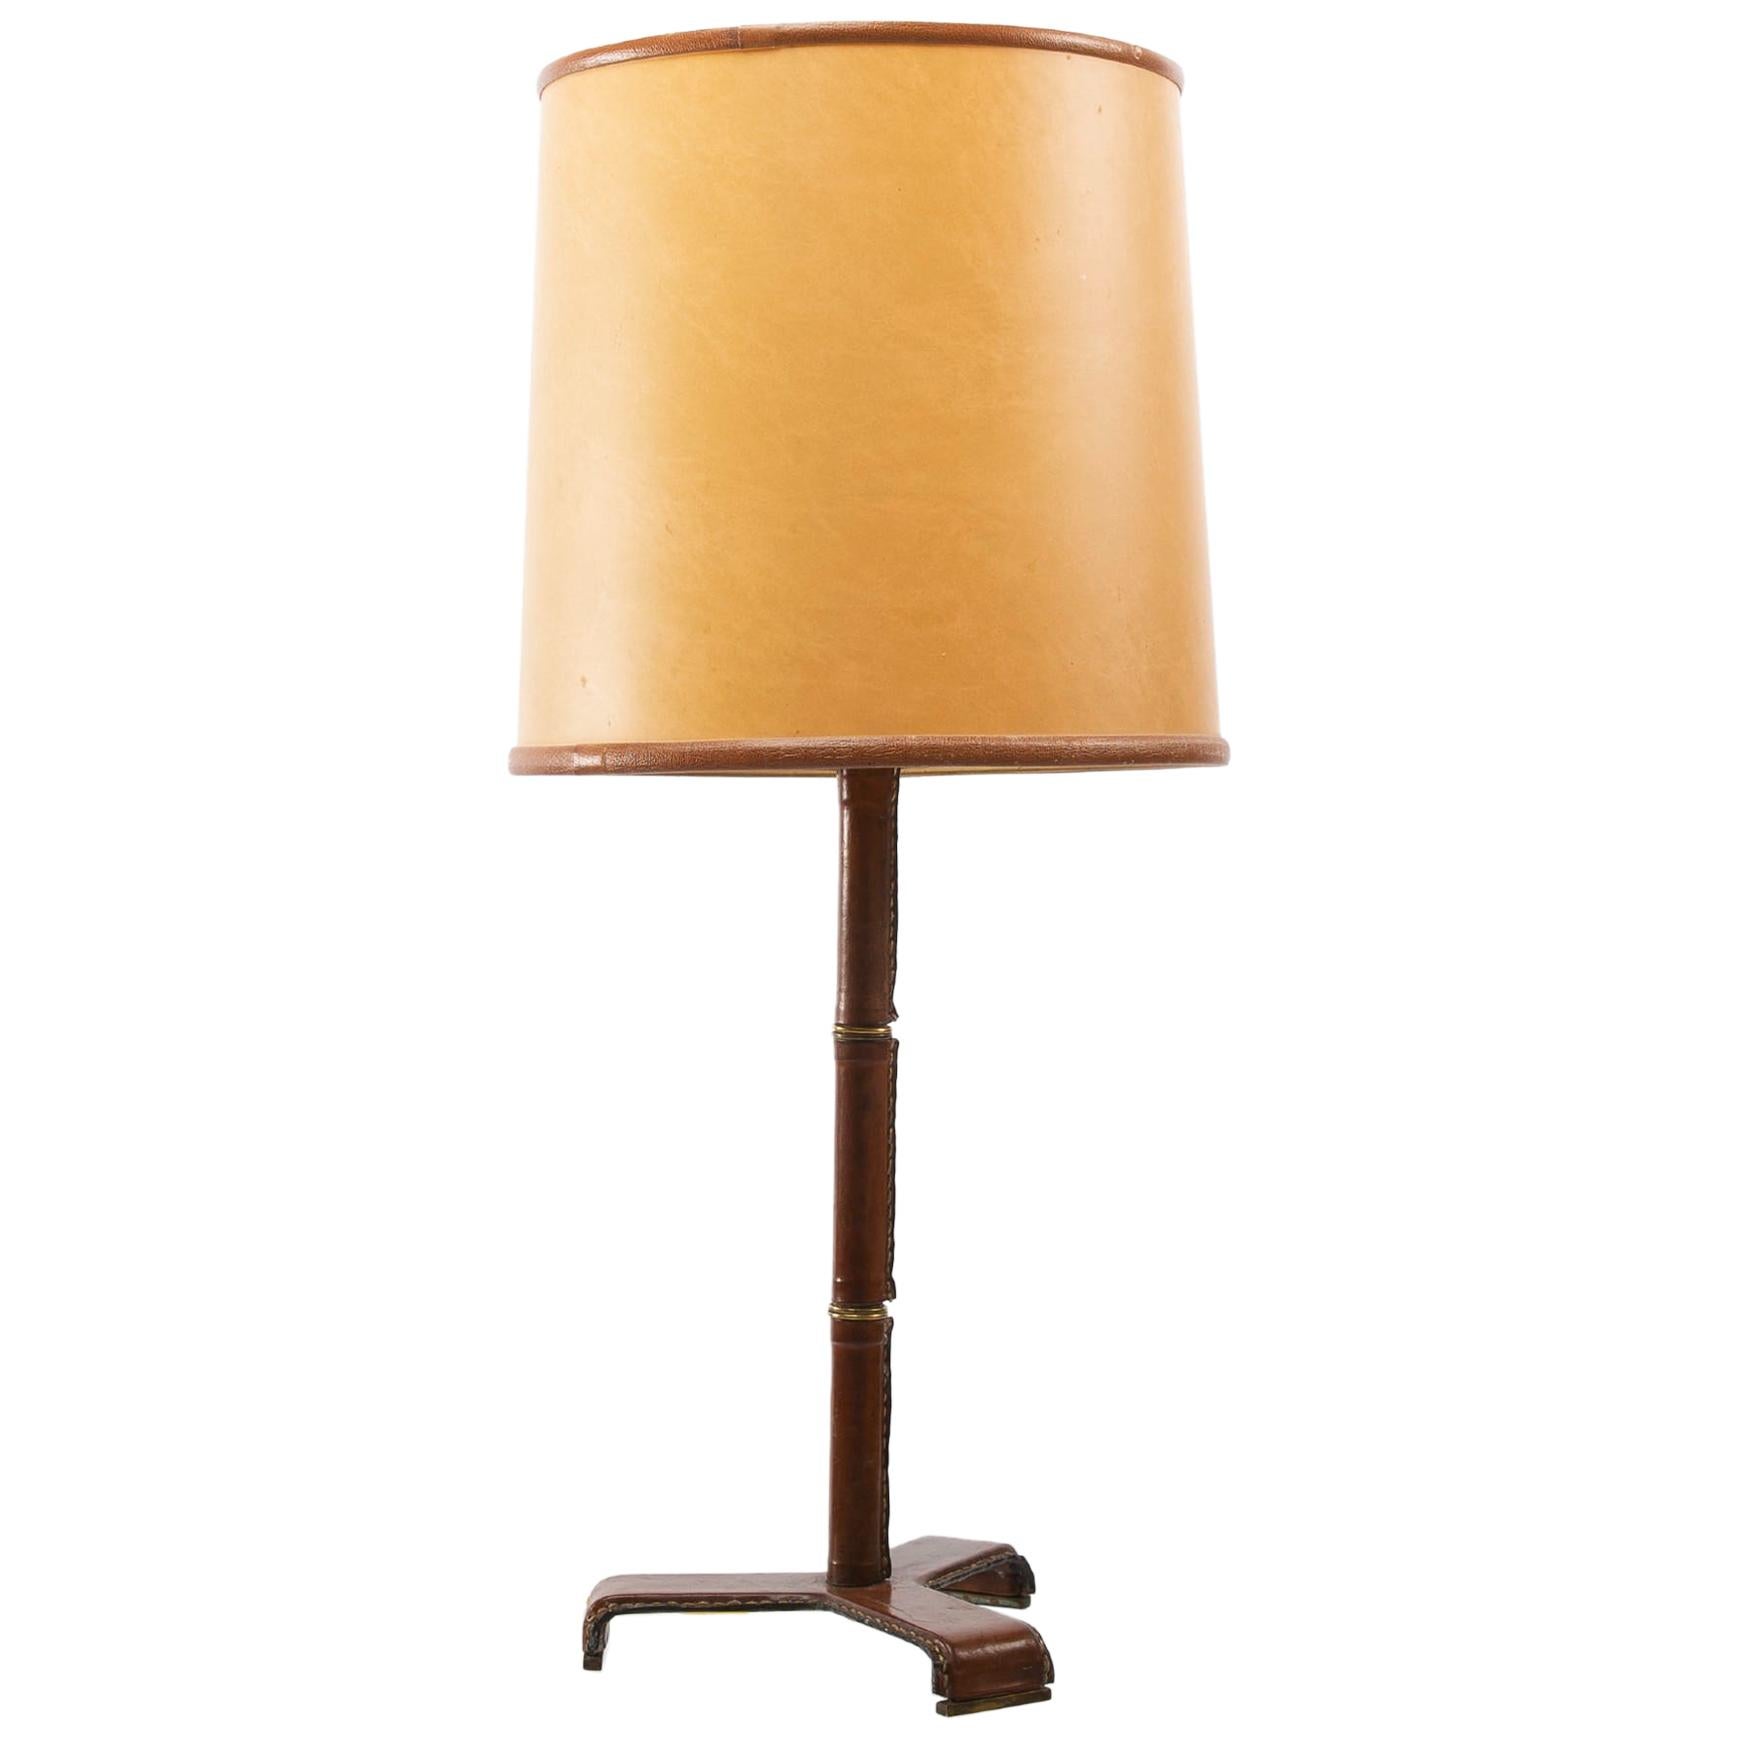 French Midcentury Desk Lamp, Jacques Adnet, Steel, Tan Leather, Brass